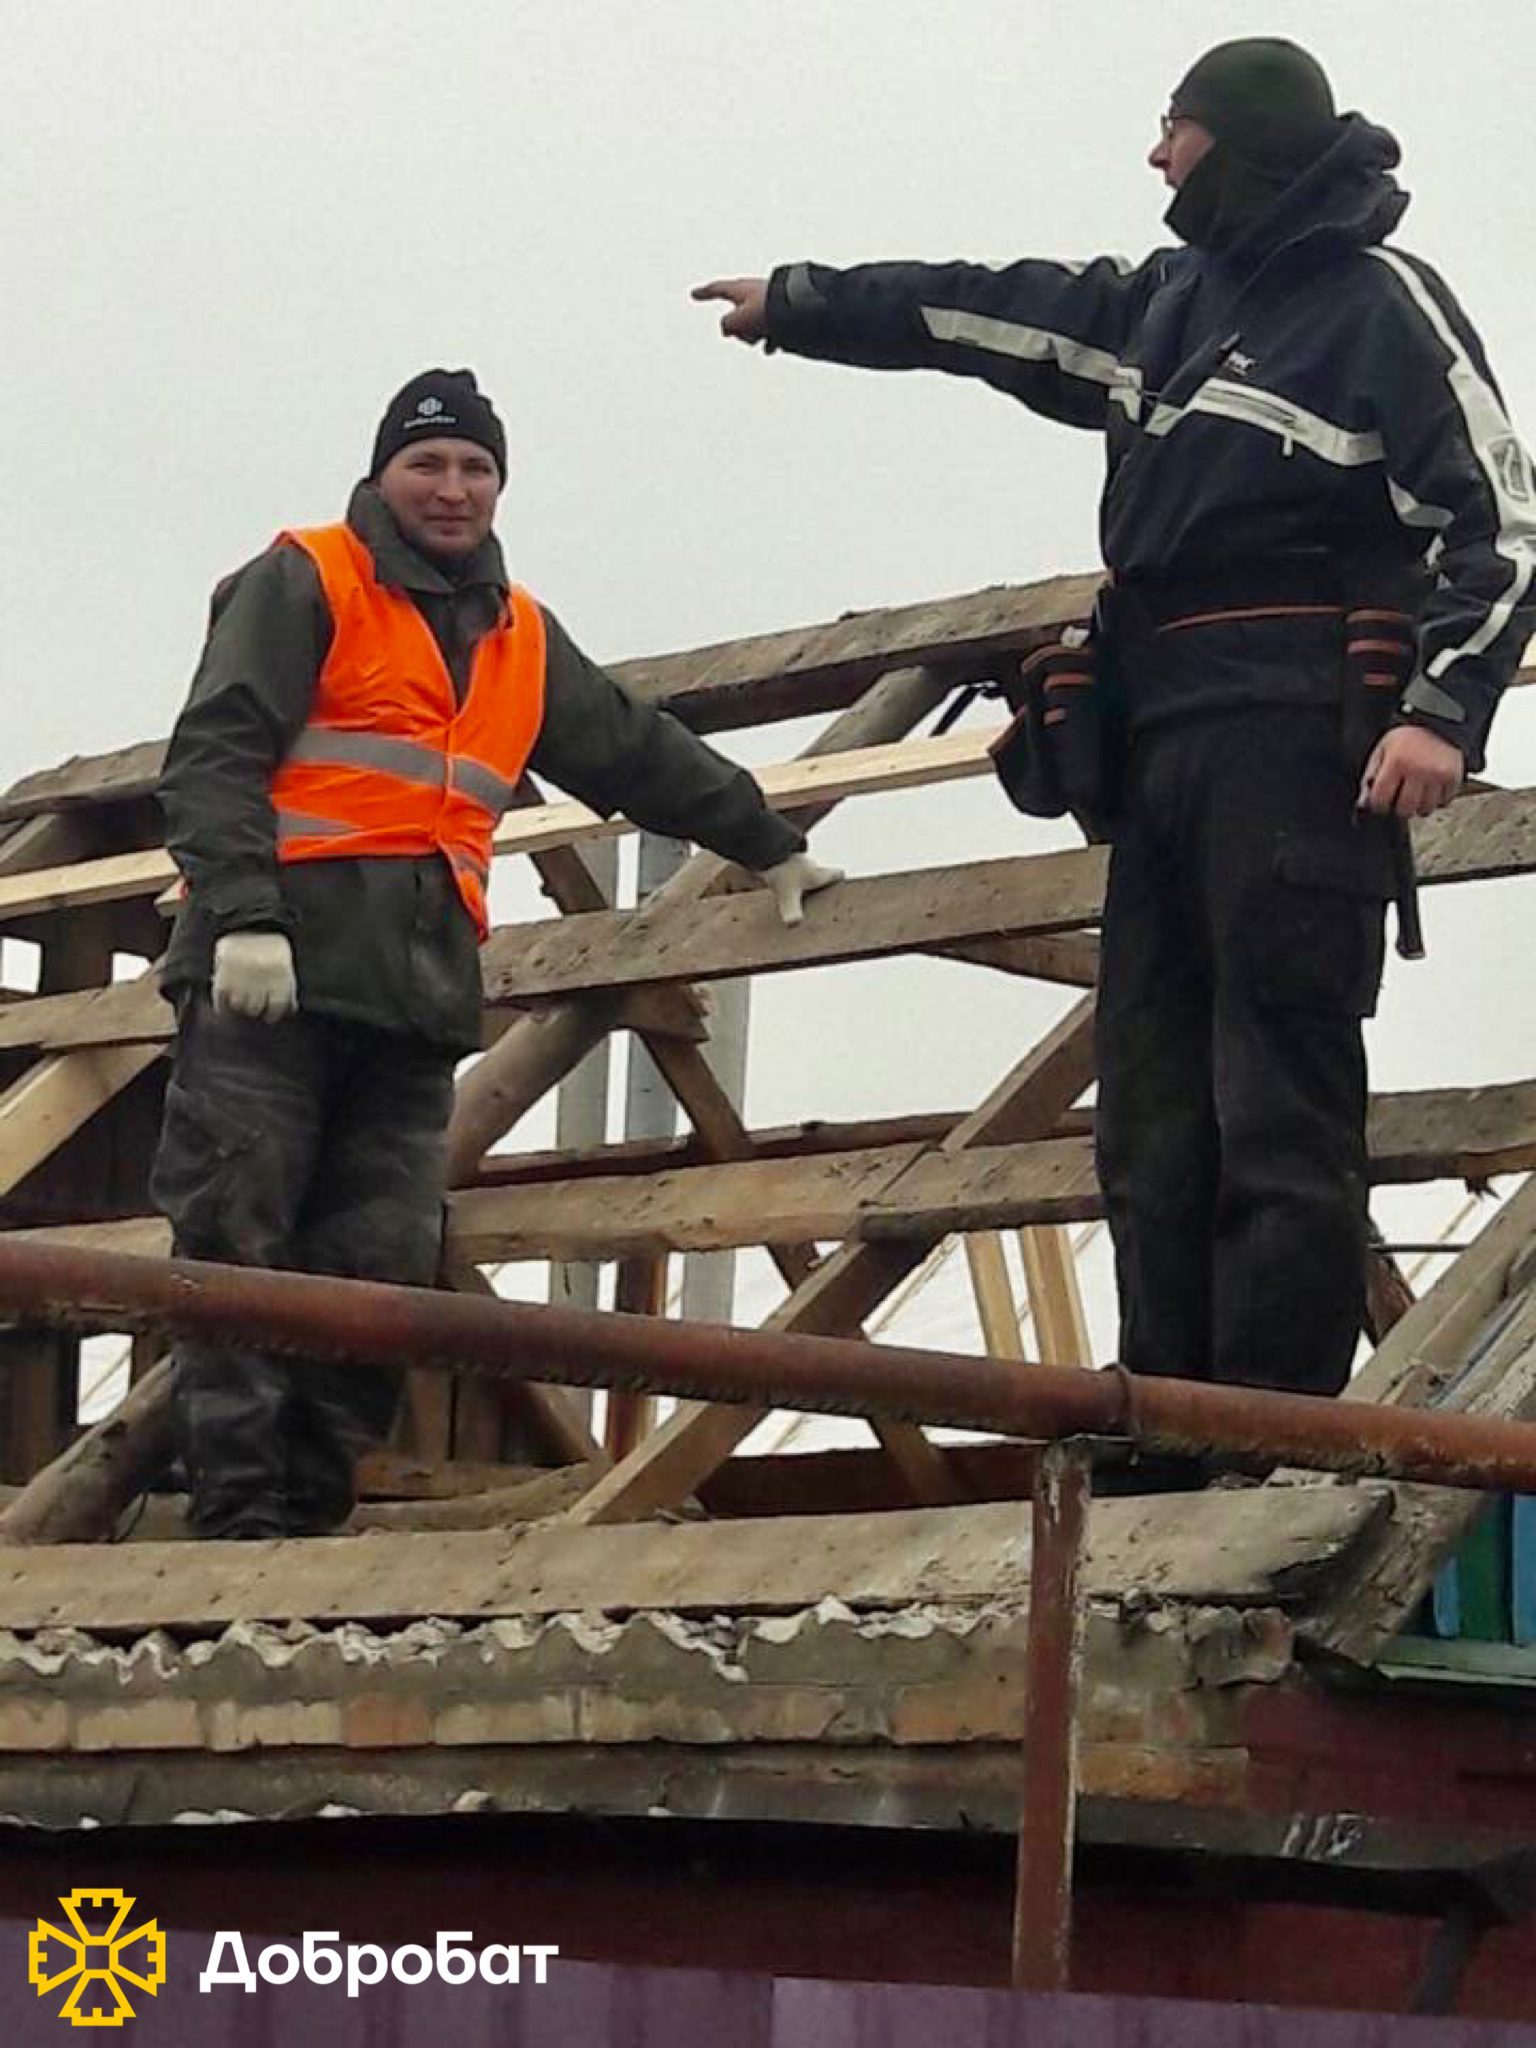 Over 260 volunteers carried out urgent repairs in five regions: about the week of Dobrobat